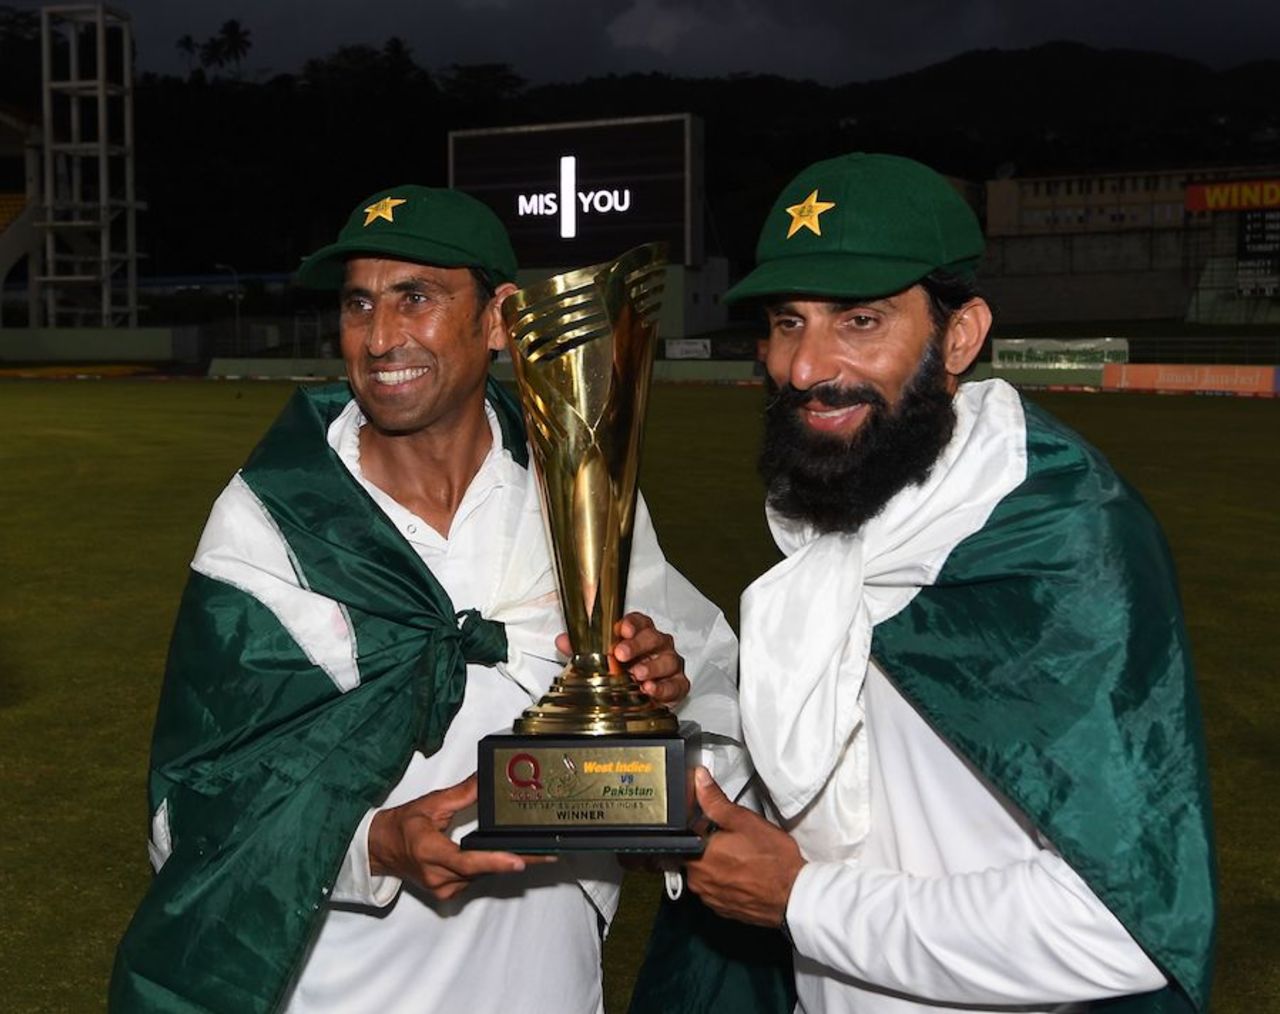 #Misyou, Misbah-ul-Haq and Younis Khan sign off, West Indies v Pakistan, 3rd Test, Dominica, 5th day, May 14, 2017